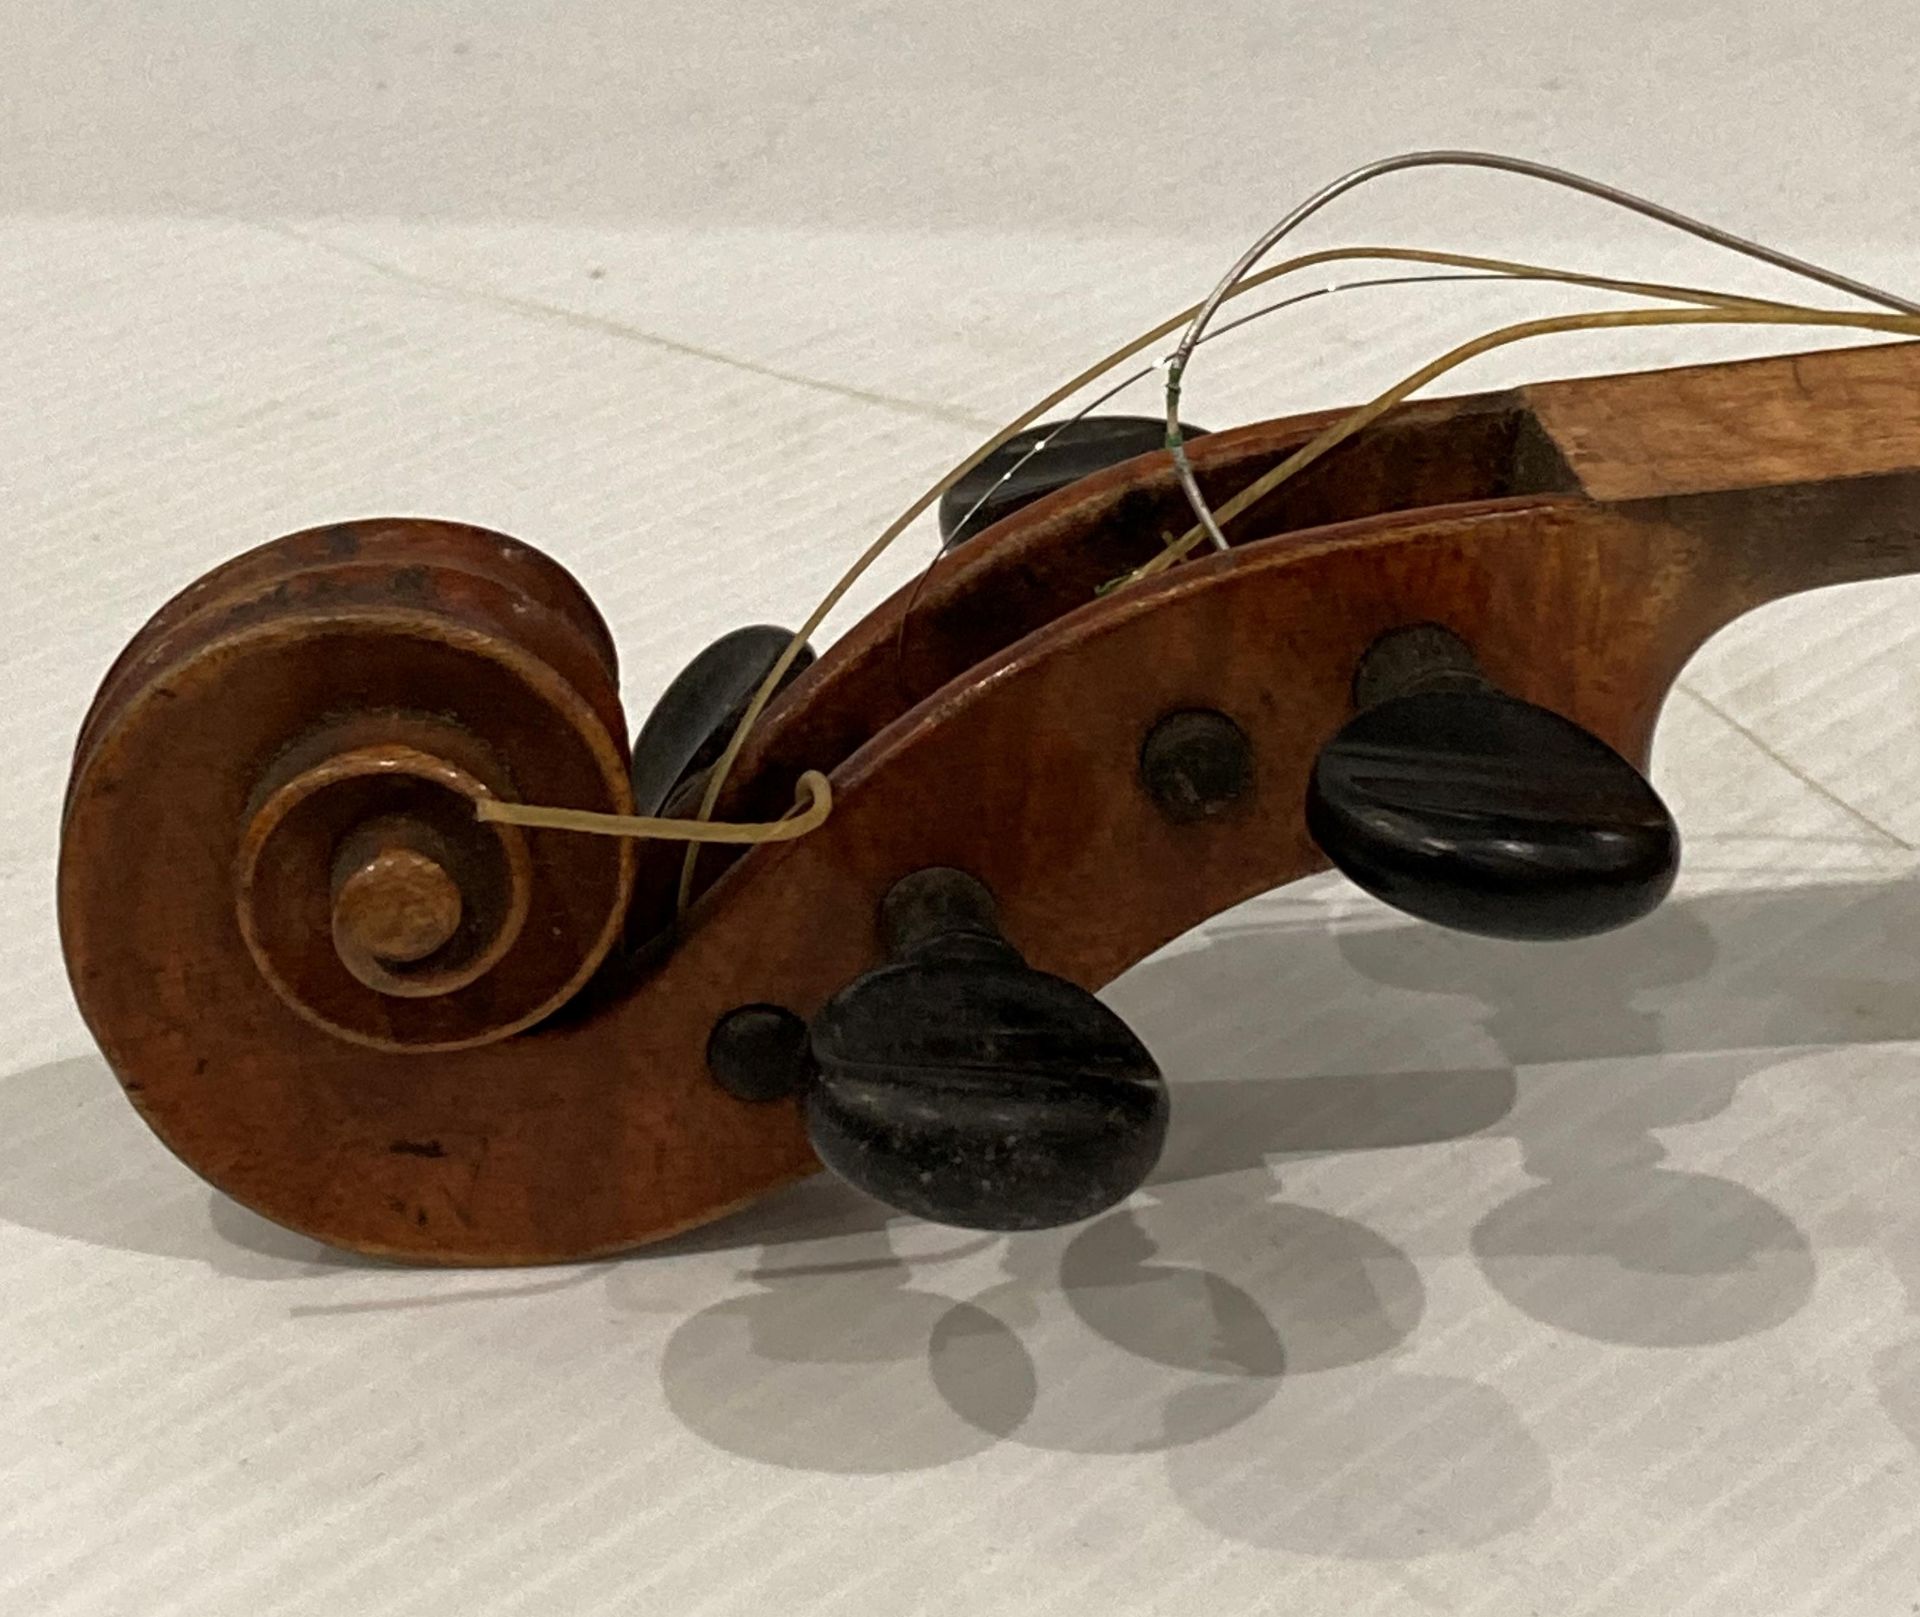 Carlo Storioni Cremonensis Faciebat 1893 violin with bow in a black case lined with green fabric - Image 11 of 14